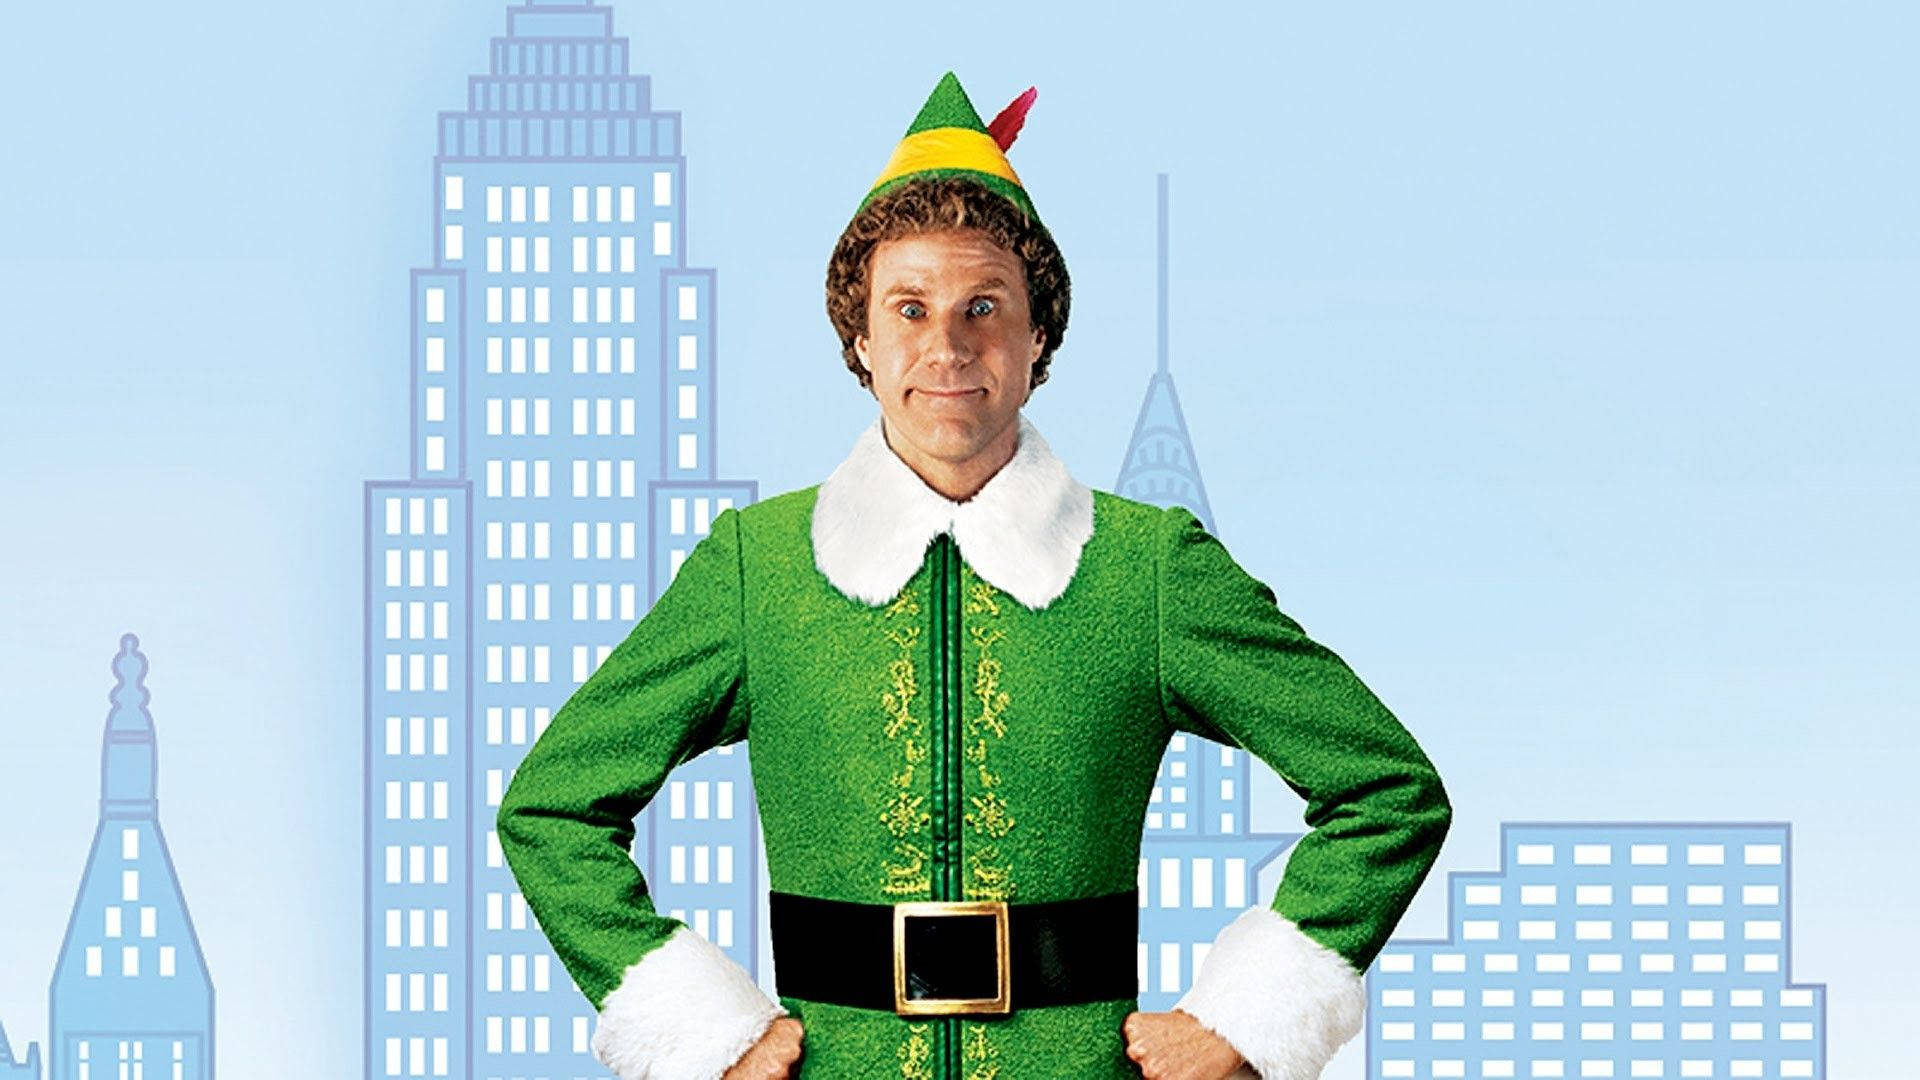 Mobile wallpaper Christmas Elf Santa Movie Arthur Christmas 561968  download the picture for free